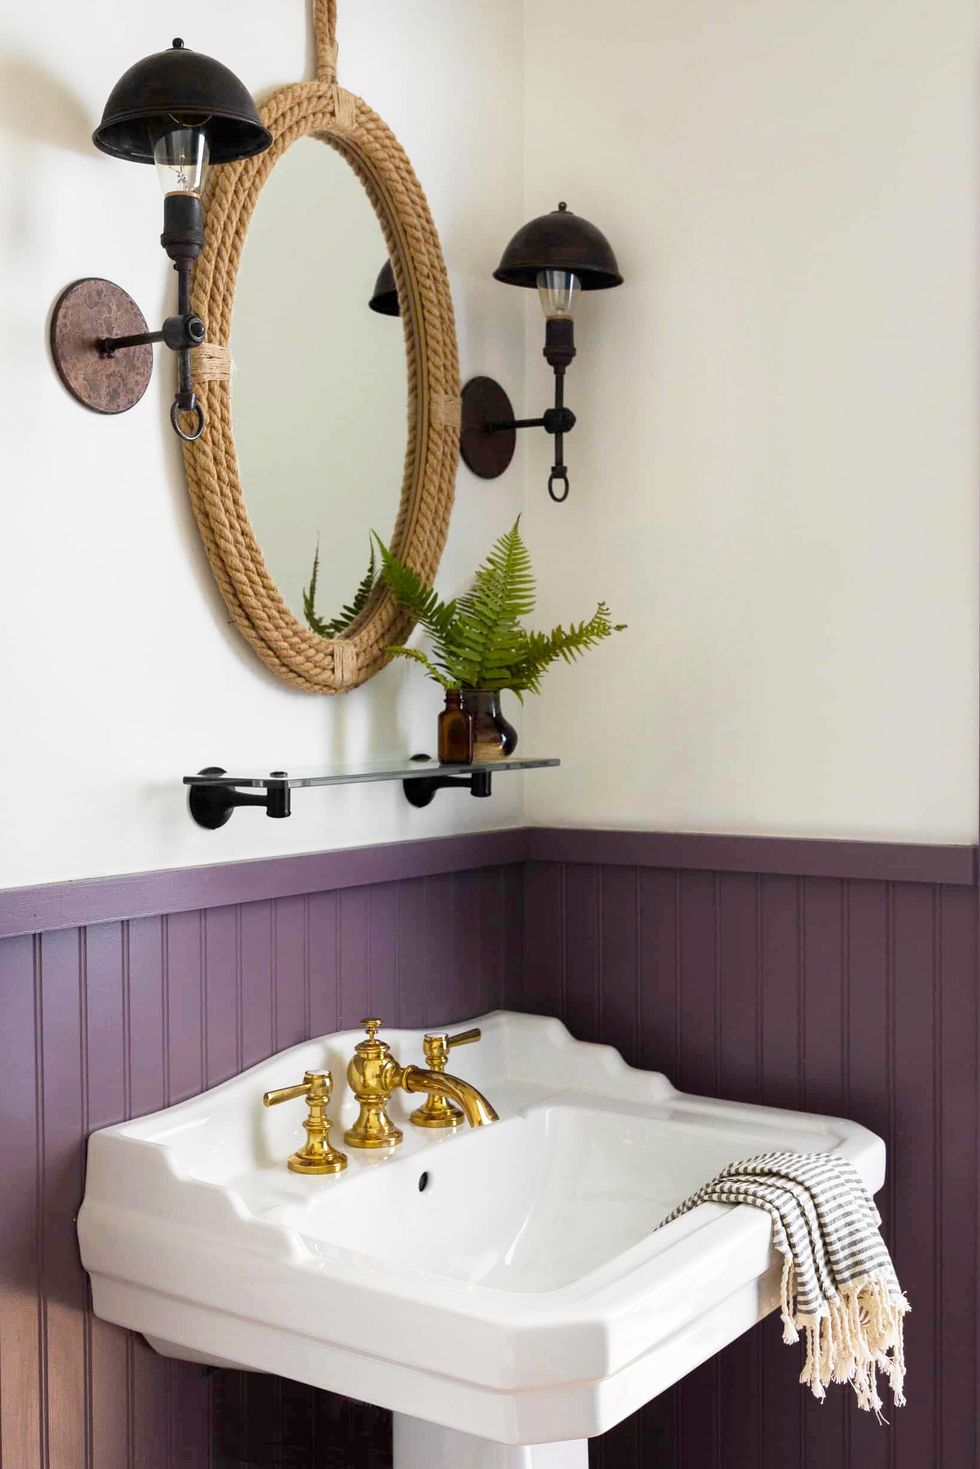 Best Bathroom Paint Colors to Personalize Your Space